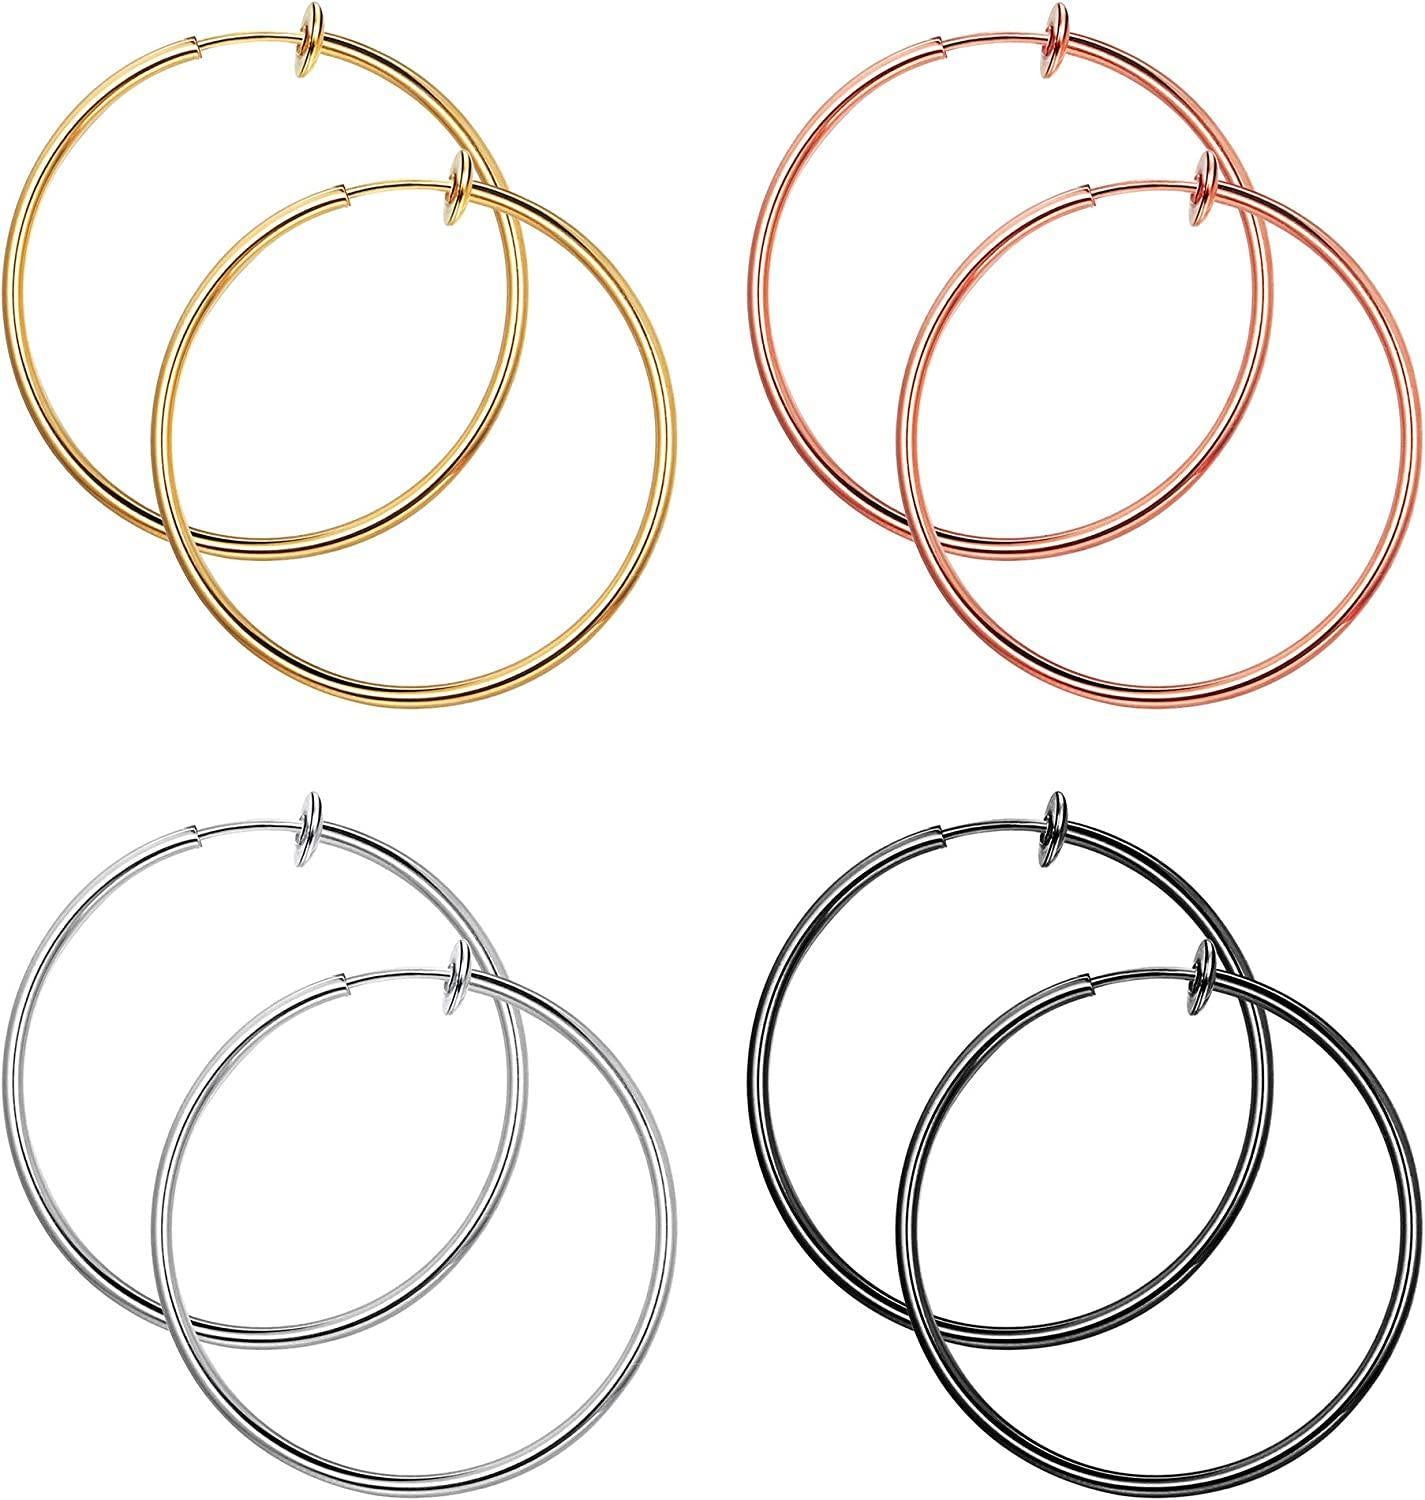 Sentence with replaced product name: 4 Pairs Stainless Fake Hoop Earrings for Woman Men Big Clip On Hoop Earrings Set Non-Pierced Ear, available in gold, rose gold, silver, and black, displayed in pairs, isolated on a white background.